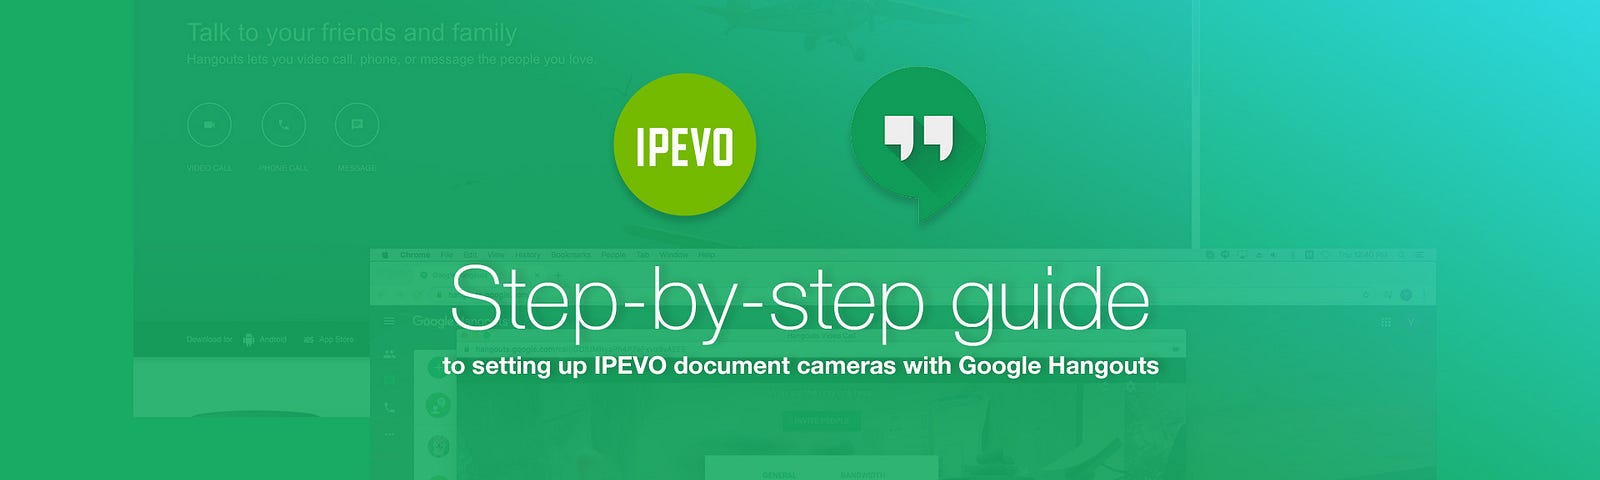 Step-by-step guide to setting up IPEVO document cameras with Google Hangouts